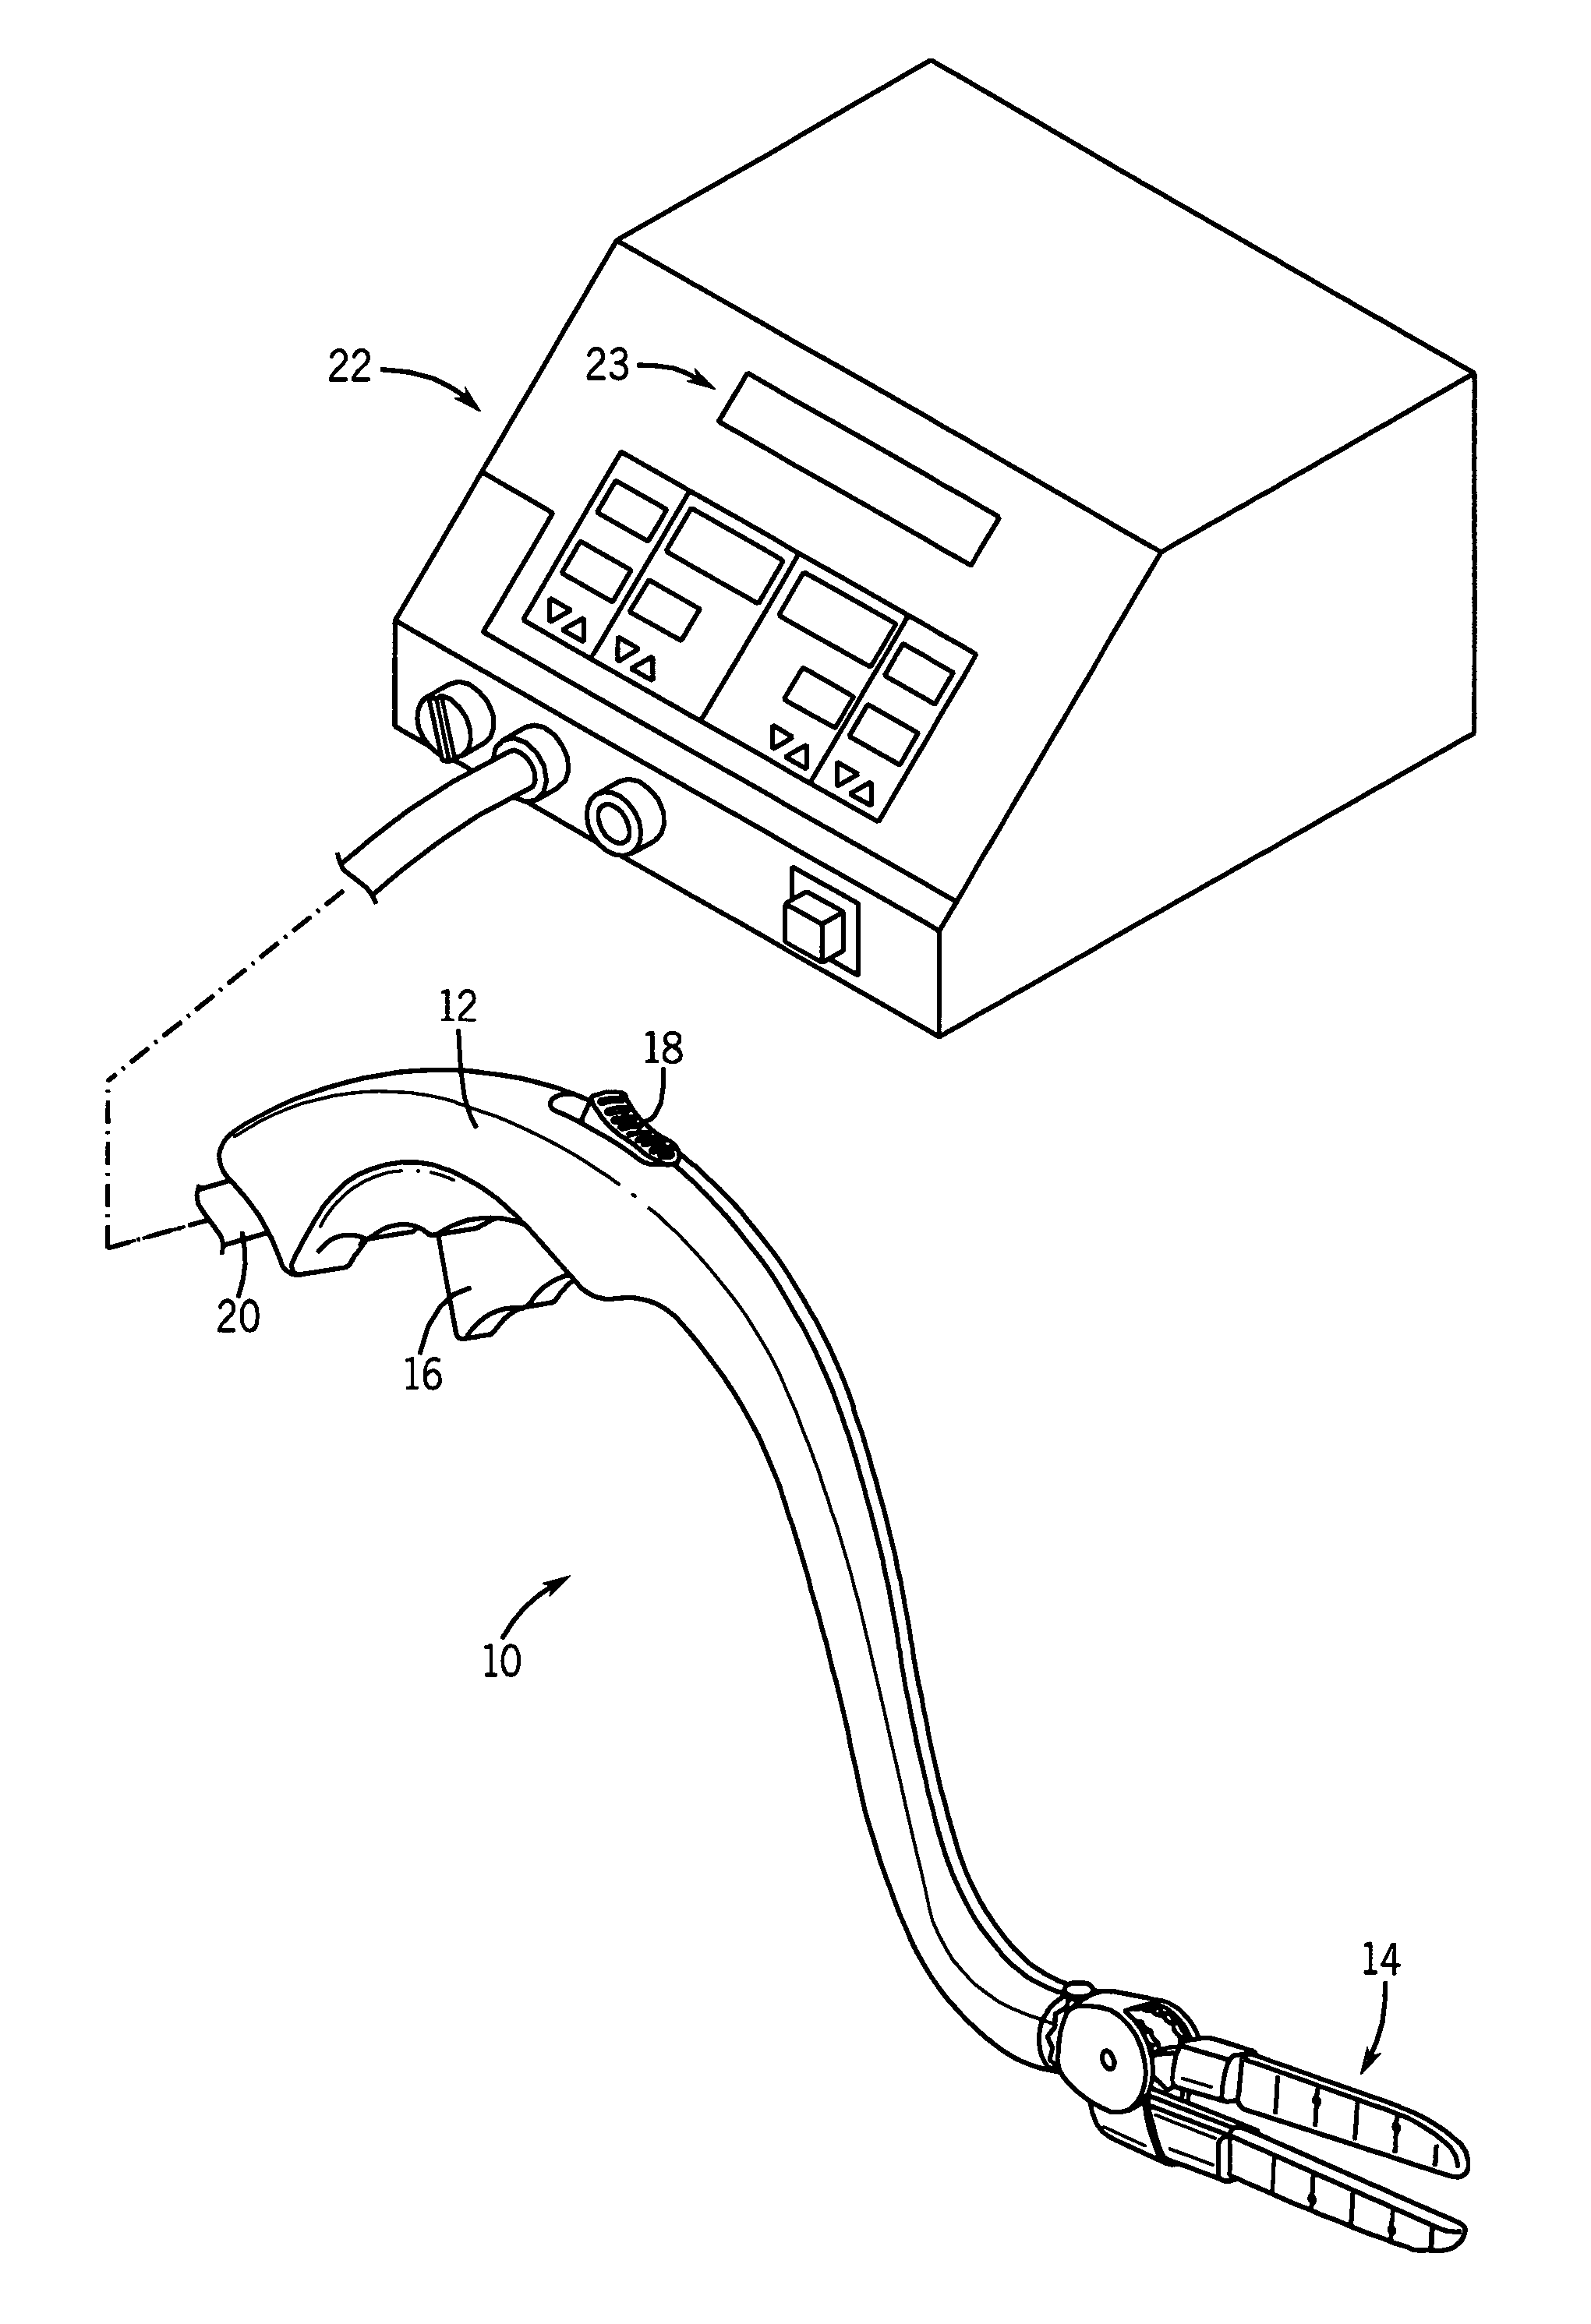 Device and method for determining tissue thickness and creating cardiac ablation lesions